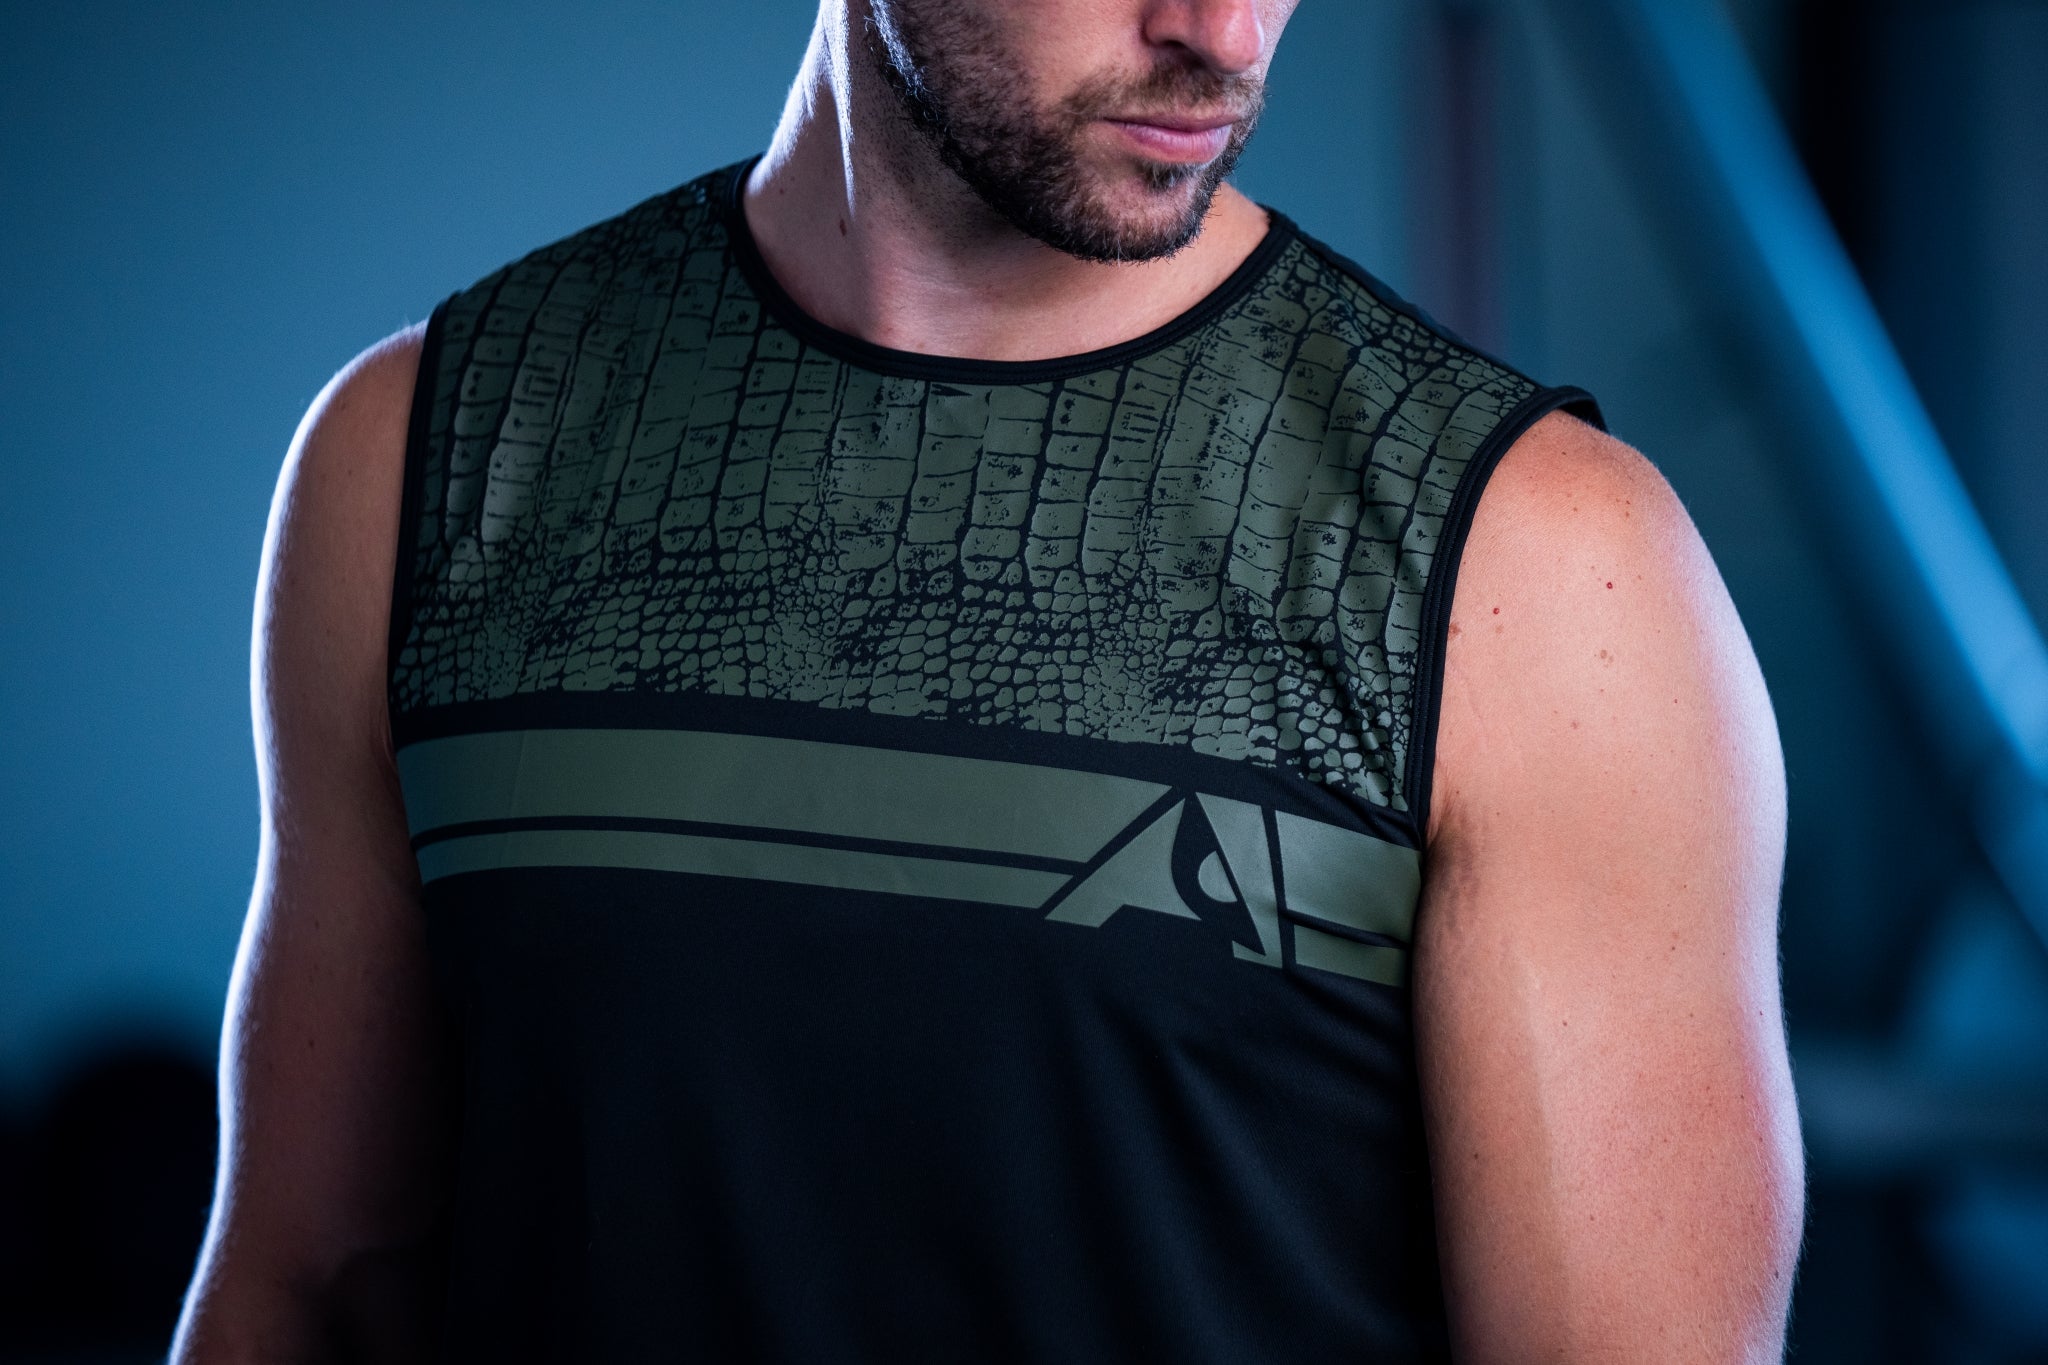 Men's sleeveless workout t-shirt inspired by crocodiles made by Apex Fitness Apparel